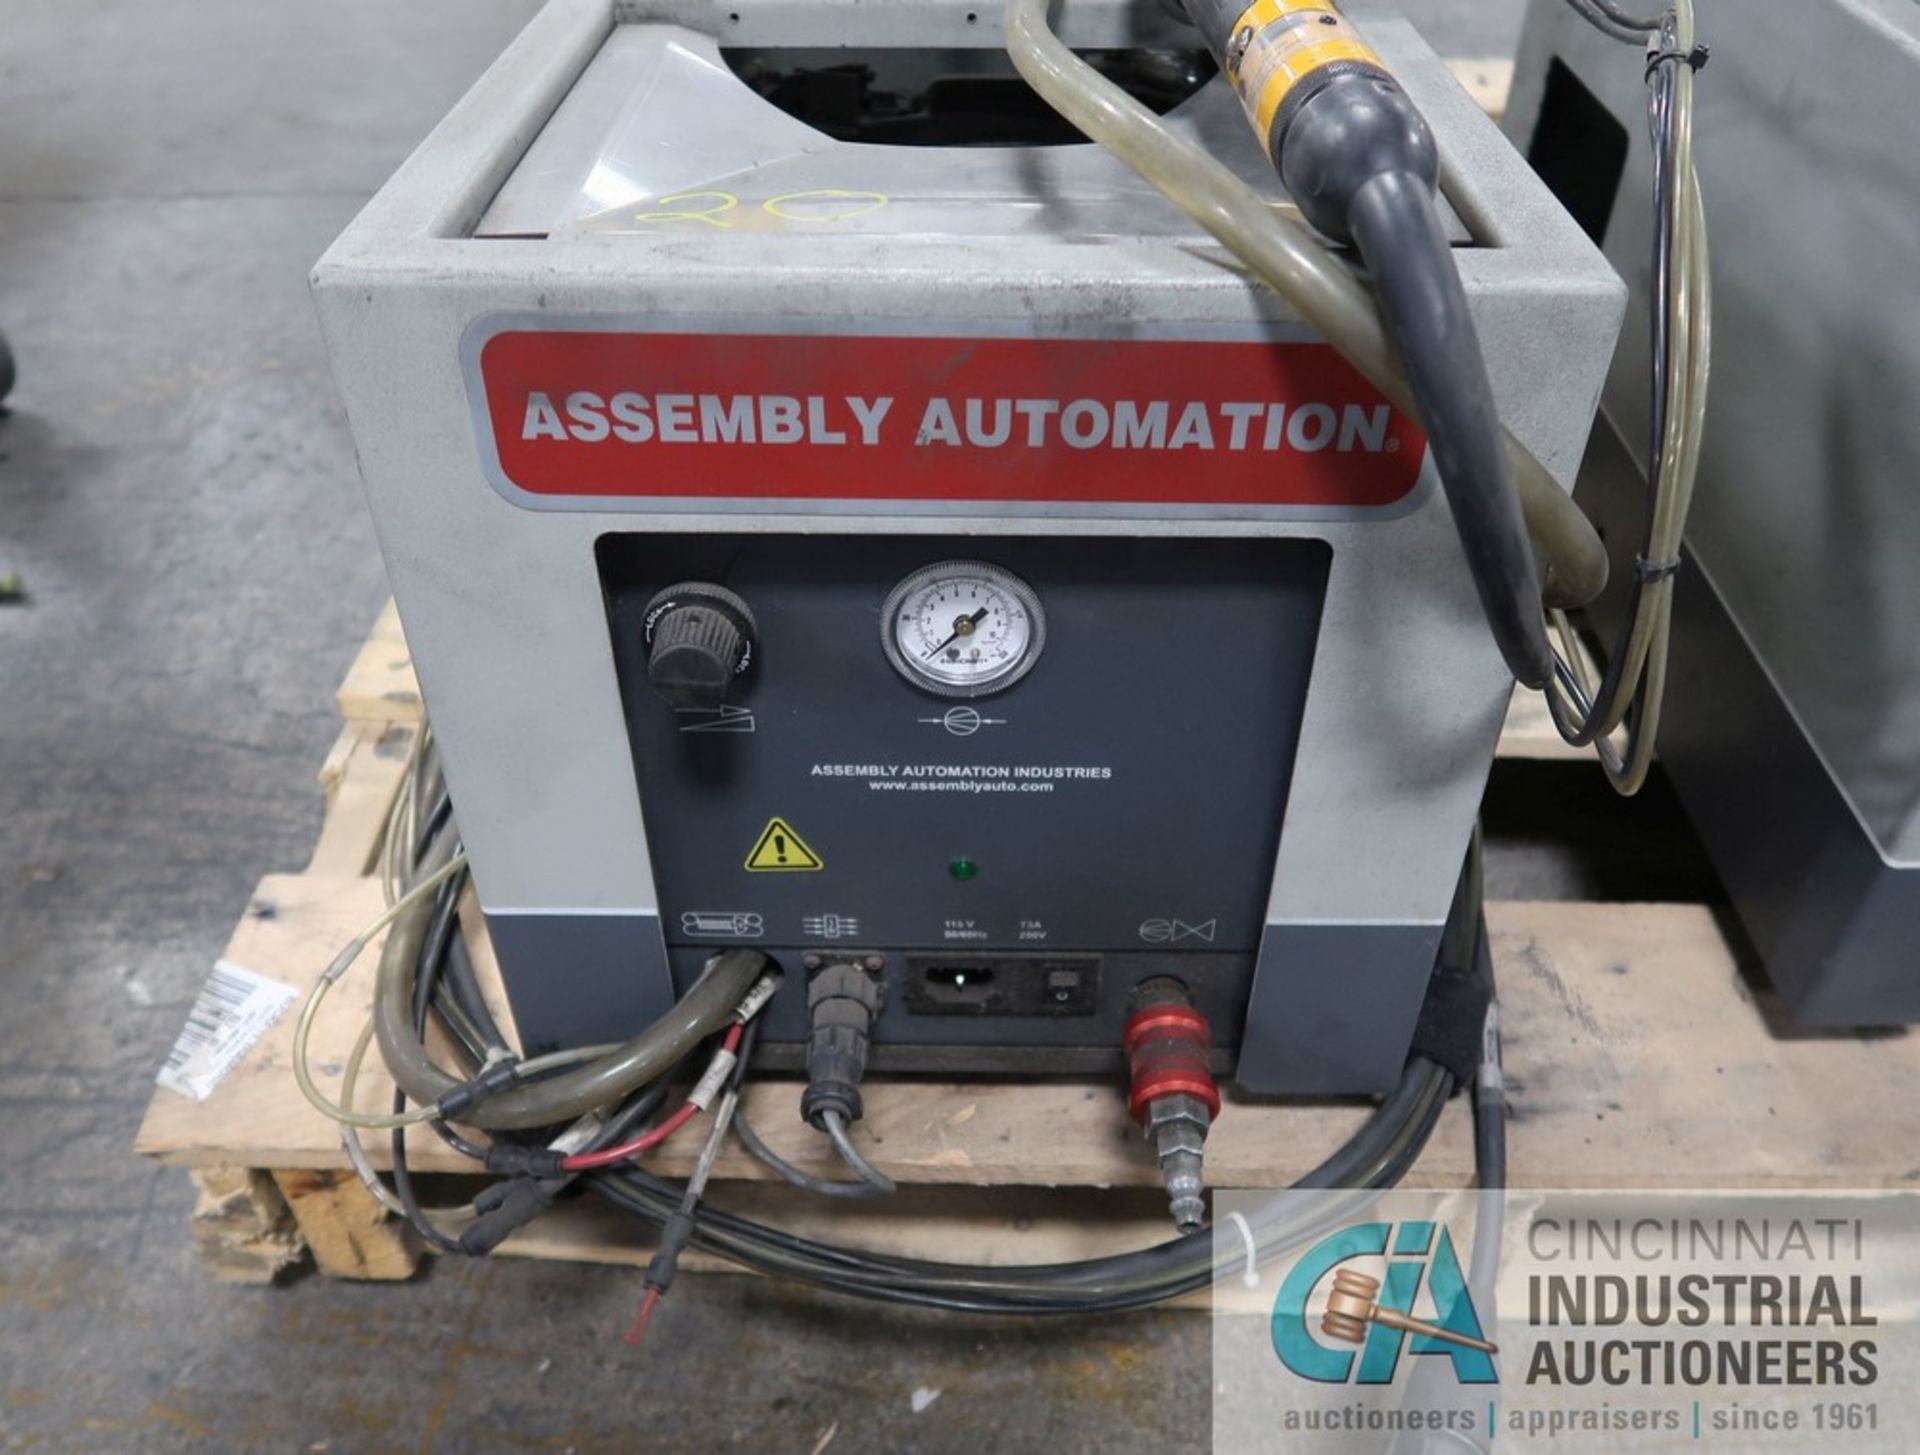 ASSEMBLY AUTOMATION PNEUMATIC STRAIGHT SHAFT SCREW GUN SYSTEM WITH NASCOMATIC DRILL SYSTEM - Image 2 of 7